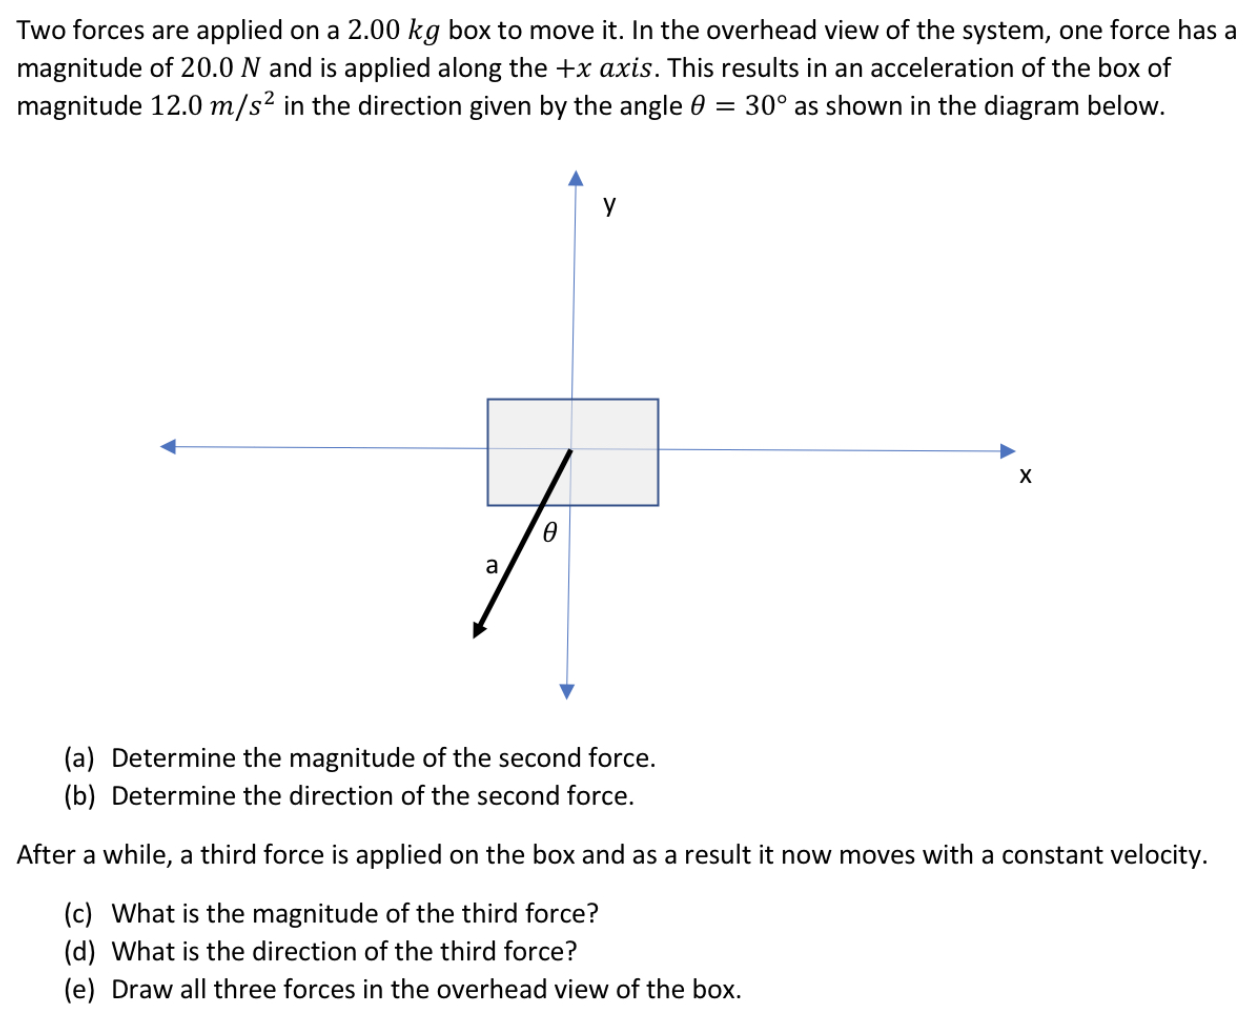 Two forces are applied on a 2.00 kg box to move it. In the overhead view of the system, one force has a magnitude of 20.0 N and is applied along the +x axis. This results in an acceleration of the box of magnitude 12.0 m/s2 in the direction given by the angle θ = 30∘ as shown in the diagram below. (a) Determine the magnitude of the second force. (b) Determine the direction of the second force. After a while, a third force is applied on the box and as a result it now moves with a constant velocity. (c) What is the magnitude of the third force? (d) What is the direction of the third force? (e) Draw all three forces in the overhead view of the box.